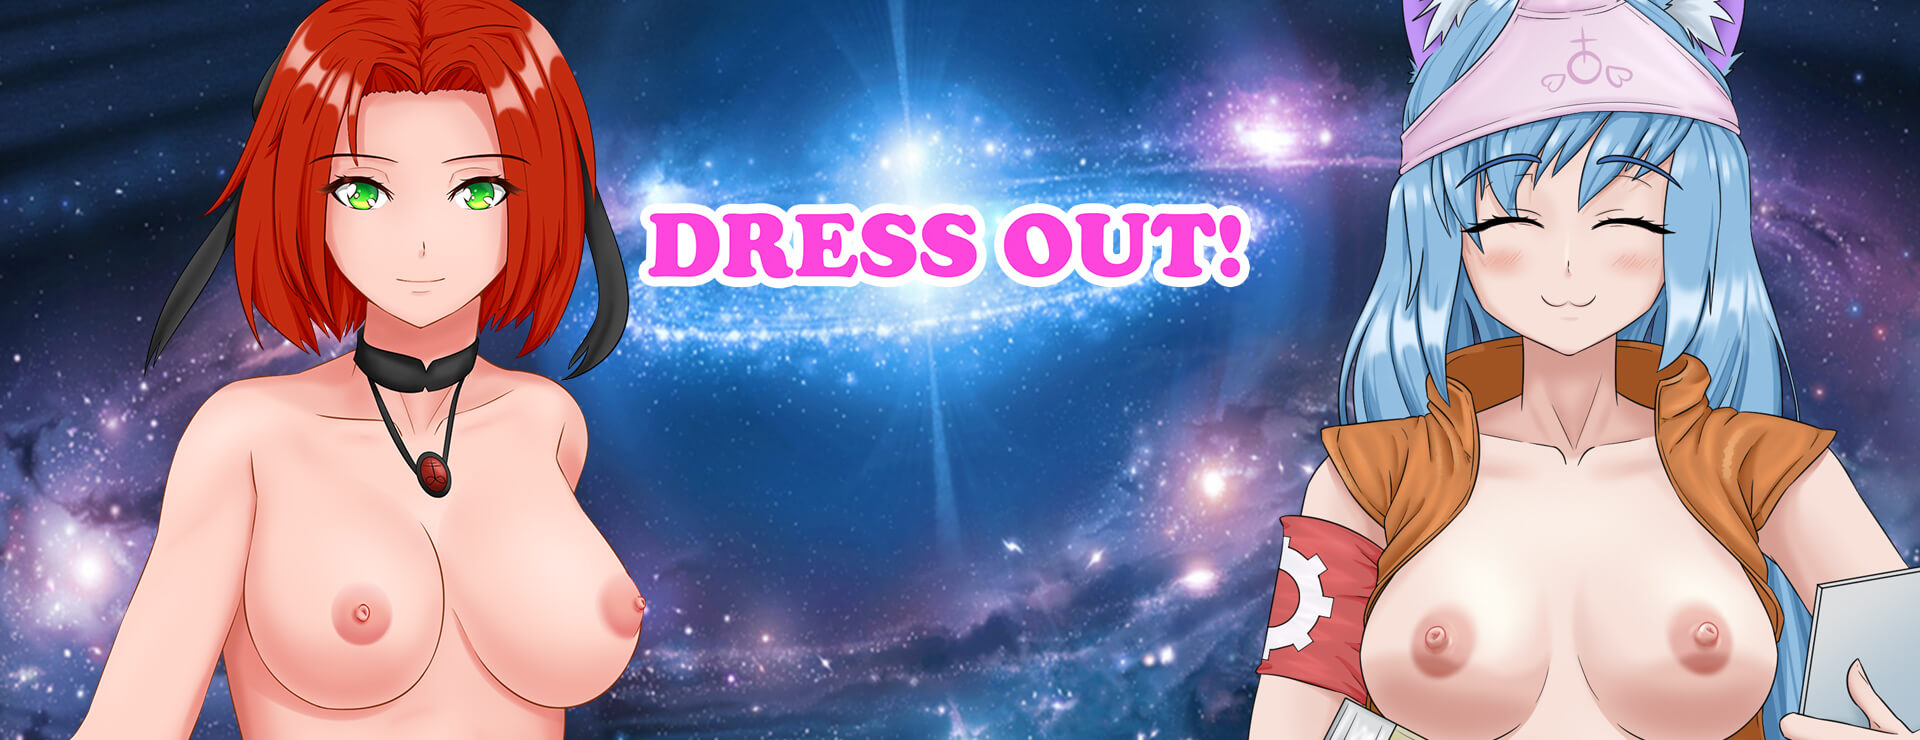 Dress Out! - Casual Game